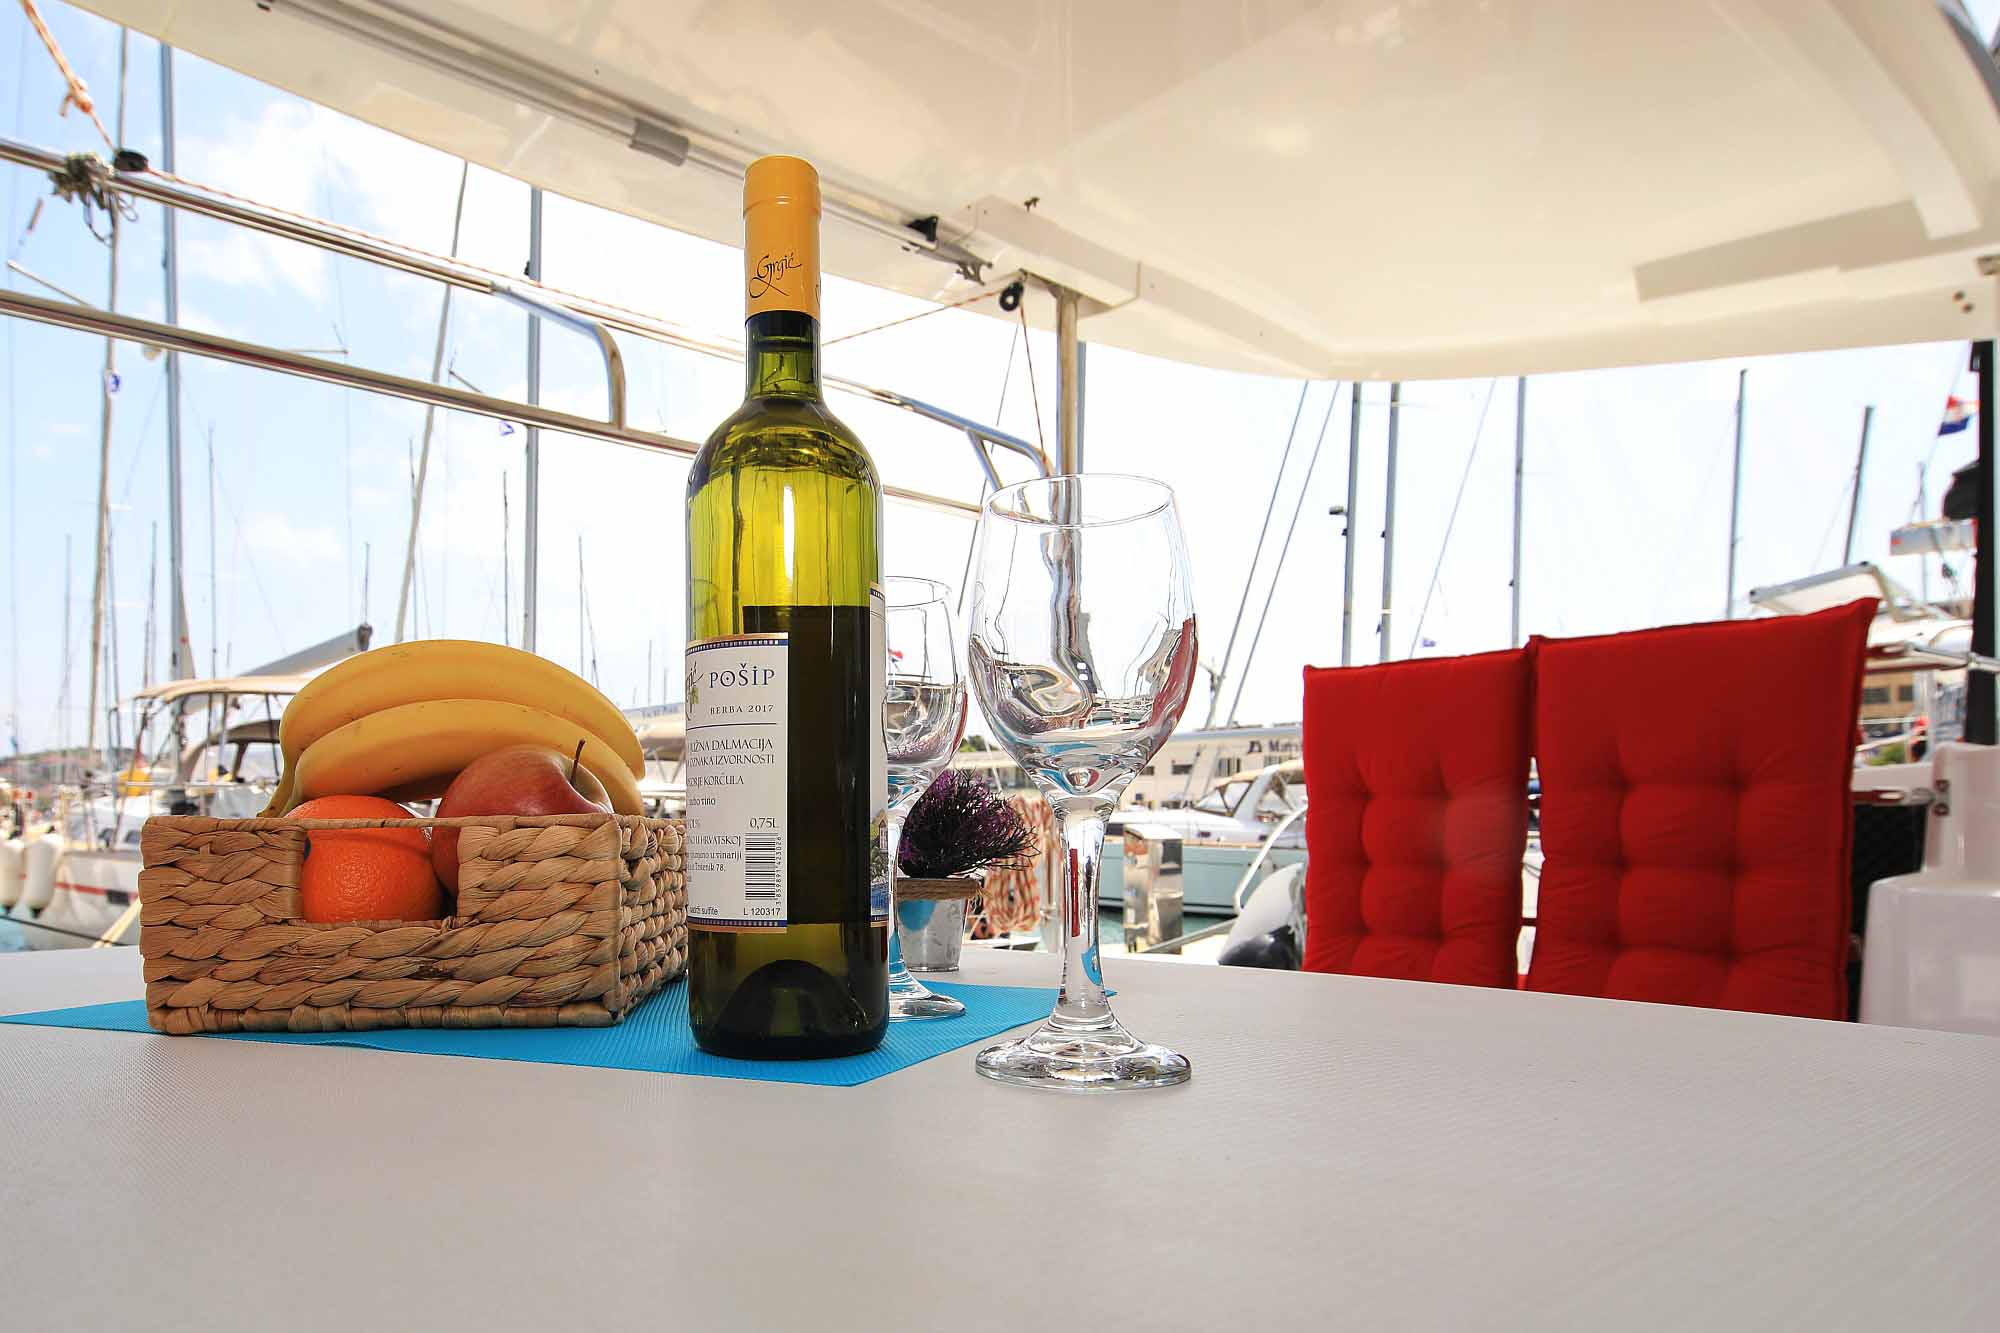 Salon catamaran lagoon 42: Ready to welcome our Guests  